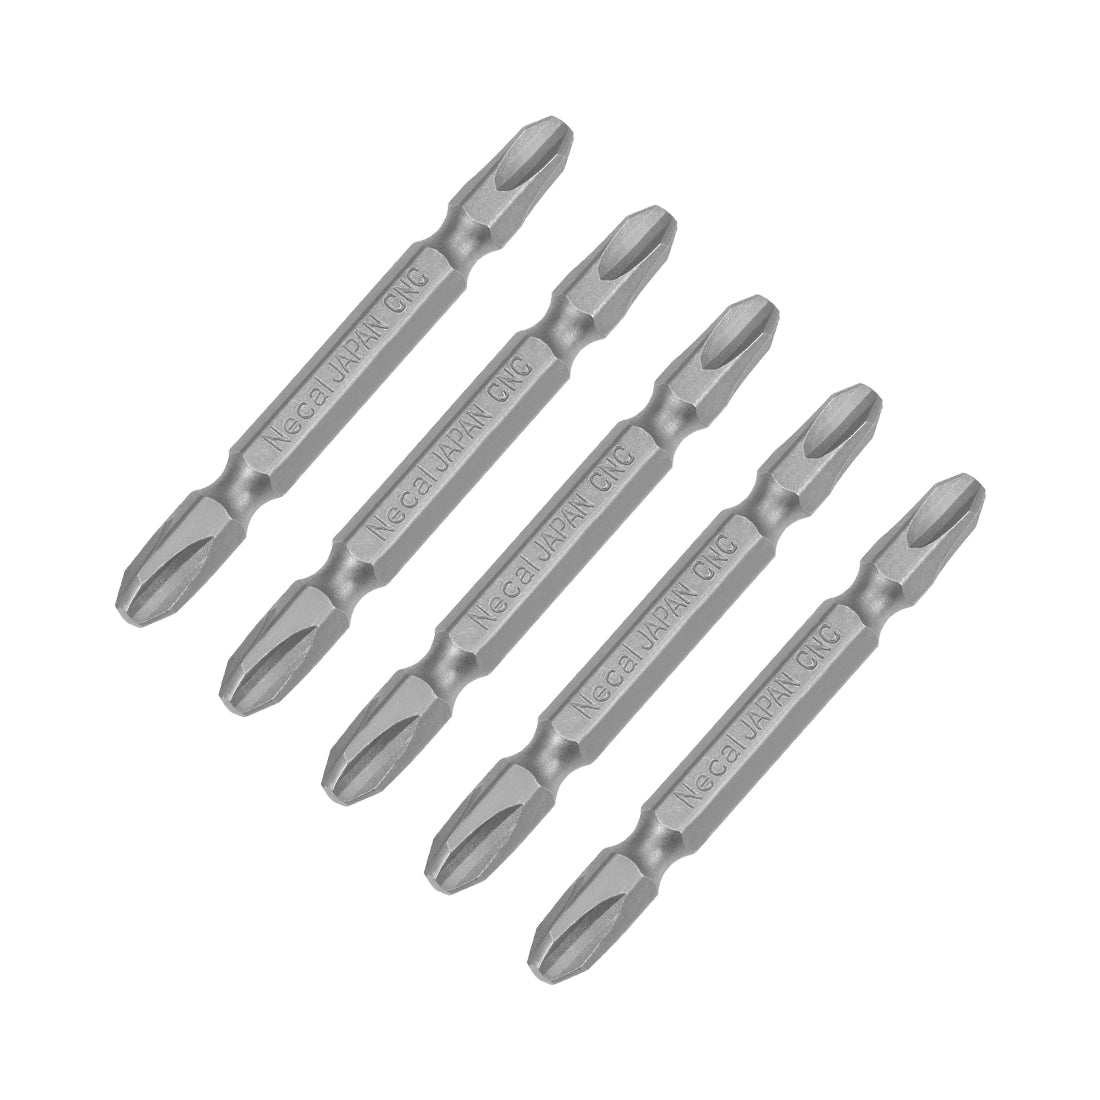 Uxcell Uxcell Phillips Bits 1/4-Inch Hex Shank 65mm Length Cross PH3 Double-Head Magnetic Screw Driver S2 Screwdriver Bit 5Pcs